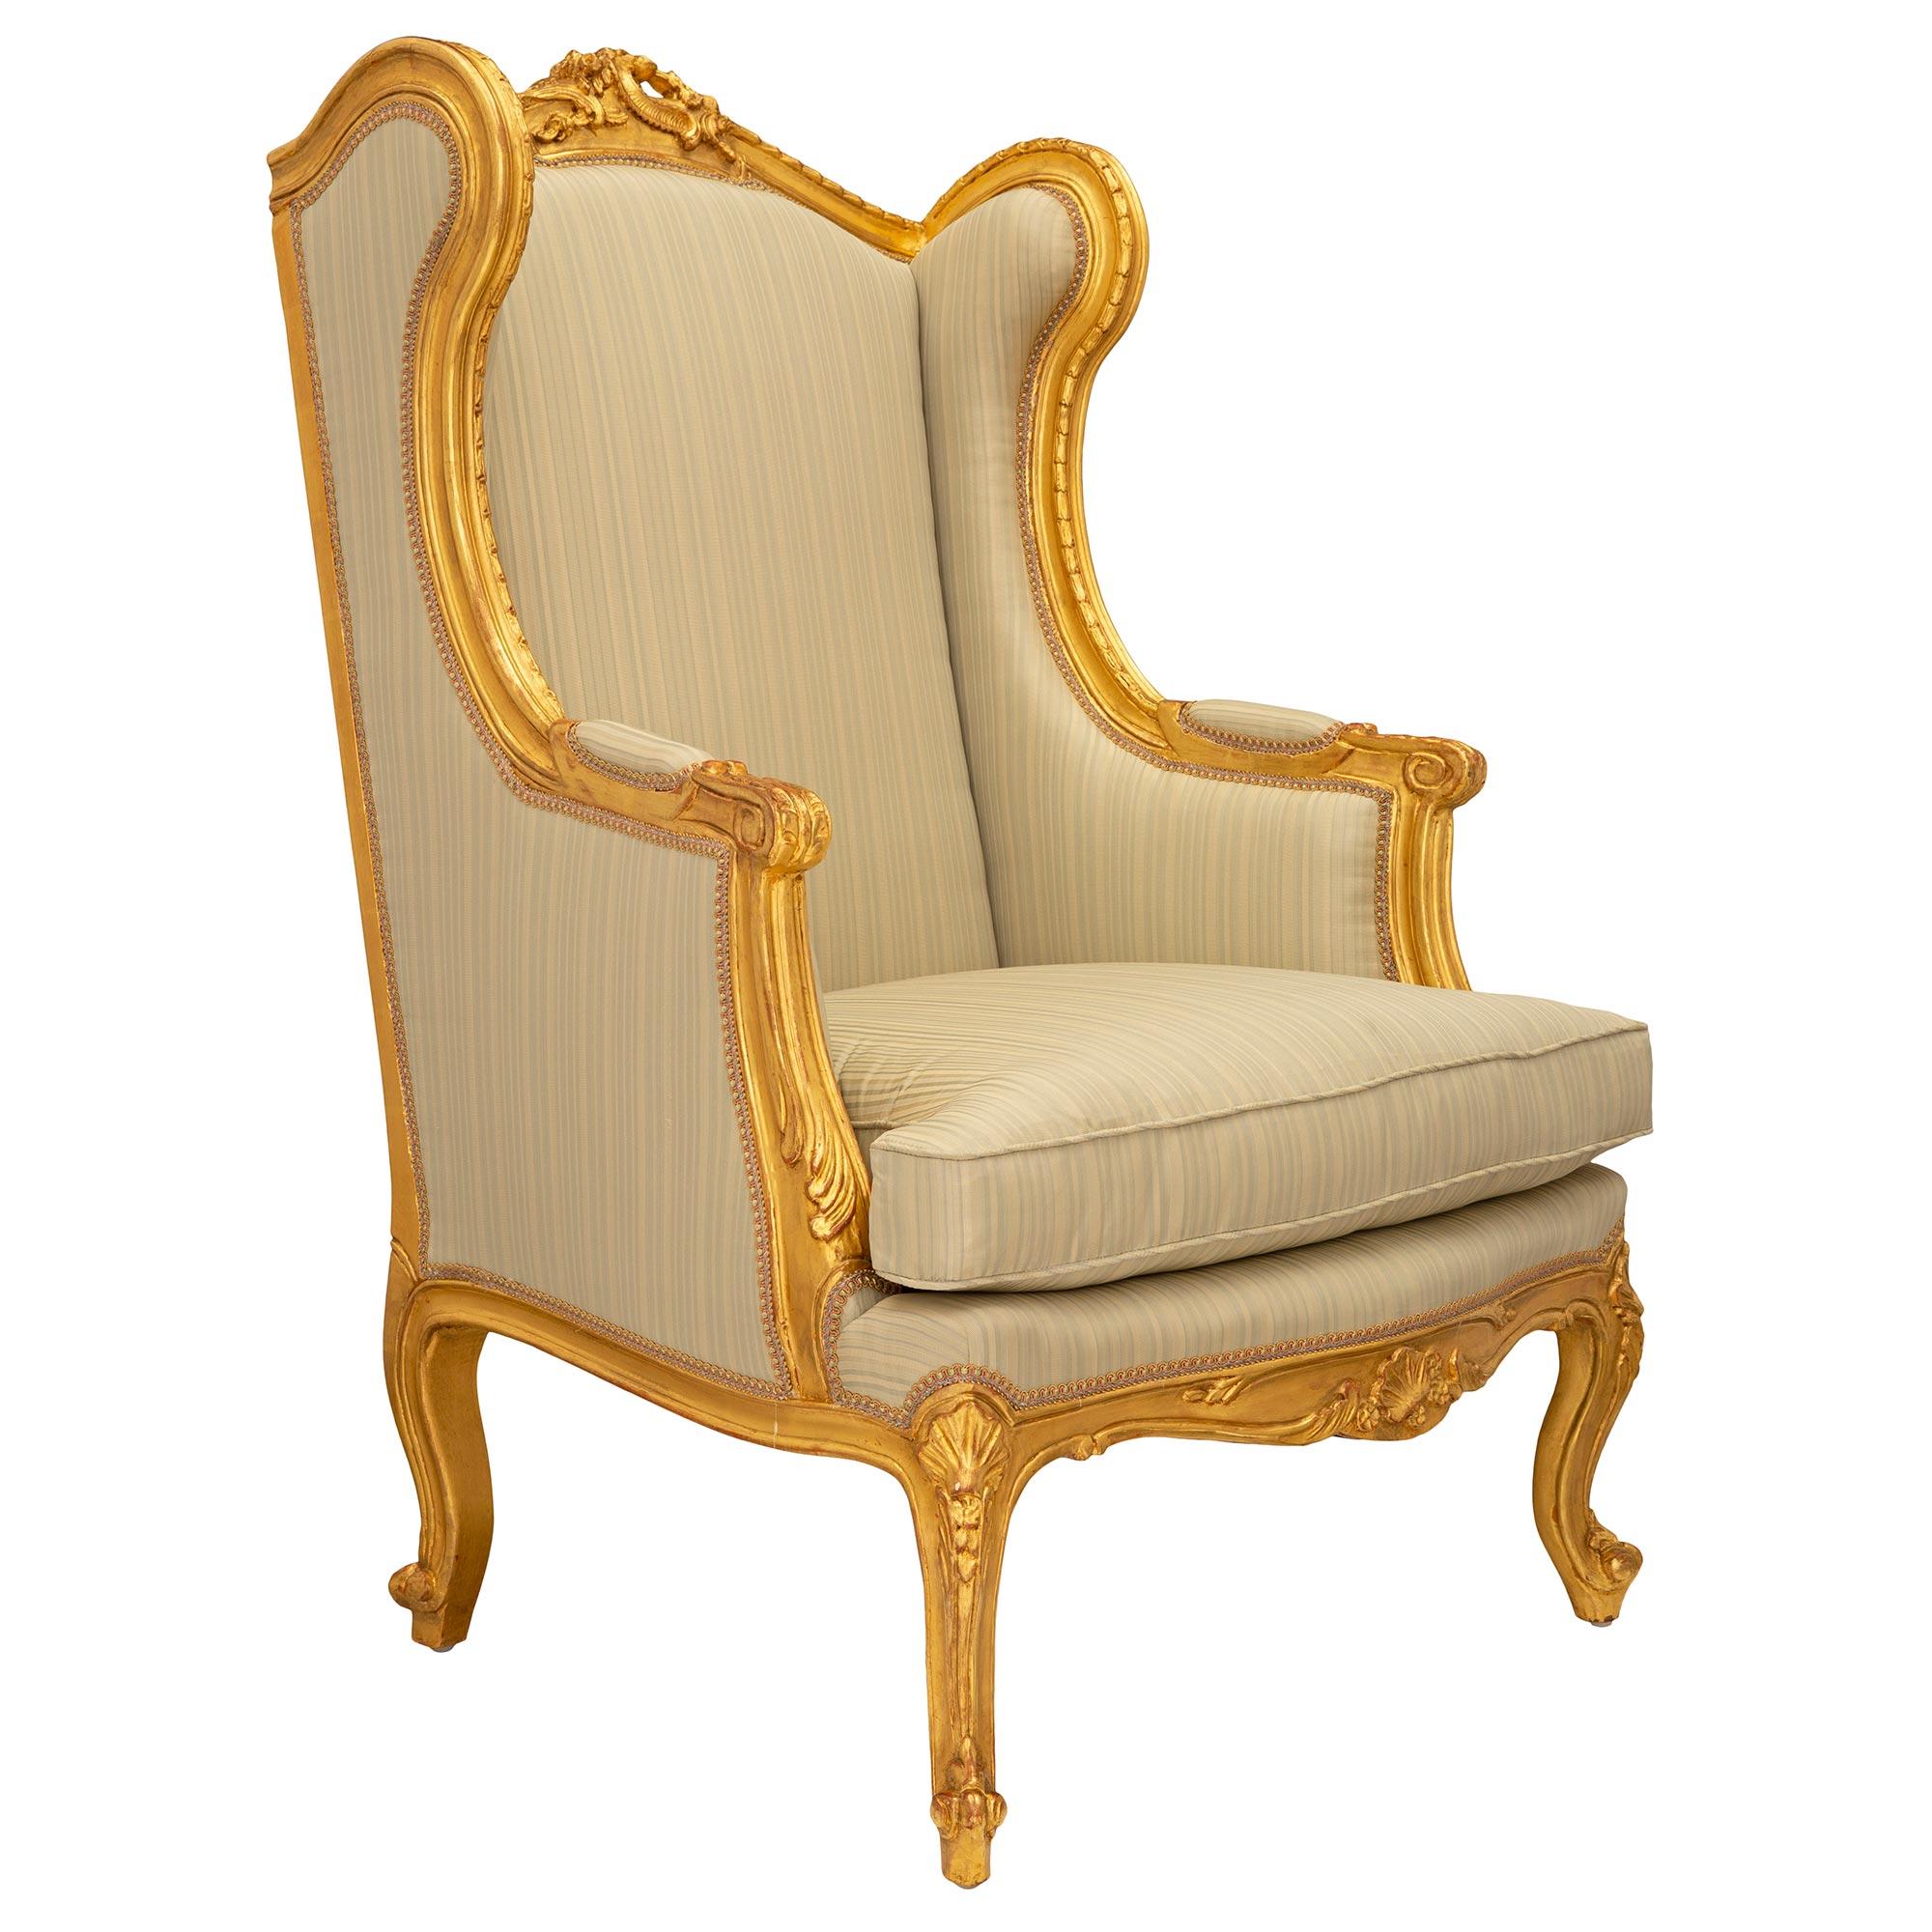 A beautiful pair of French 19th century Louis XV st. giltwood Bergères À Oreilles armchairs. Each armchair is raised by elegant cabriole legs with scrolled feet and finely carved seashell reserves at the corners. The arbalest shaped frieze displays